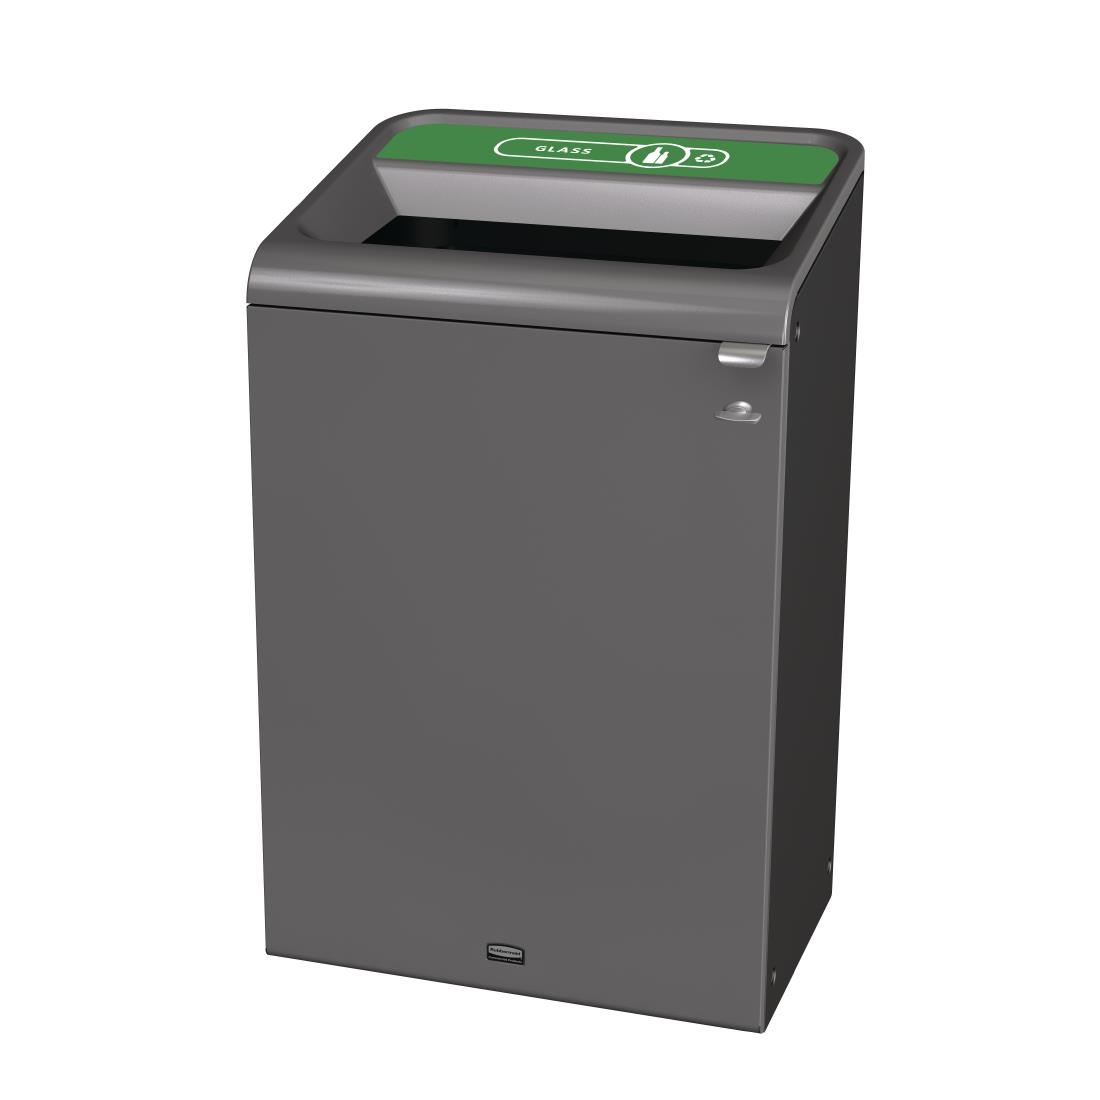 Rubbermaid Configure Recycling Bin with Glass Recycling Label Green 125Ltr (CX968)